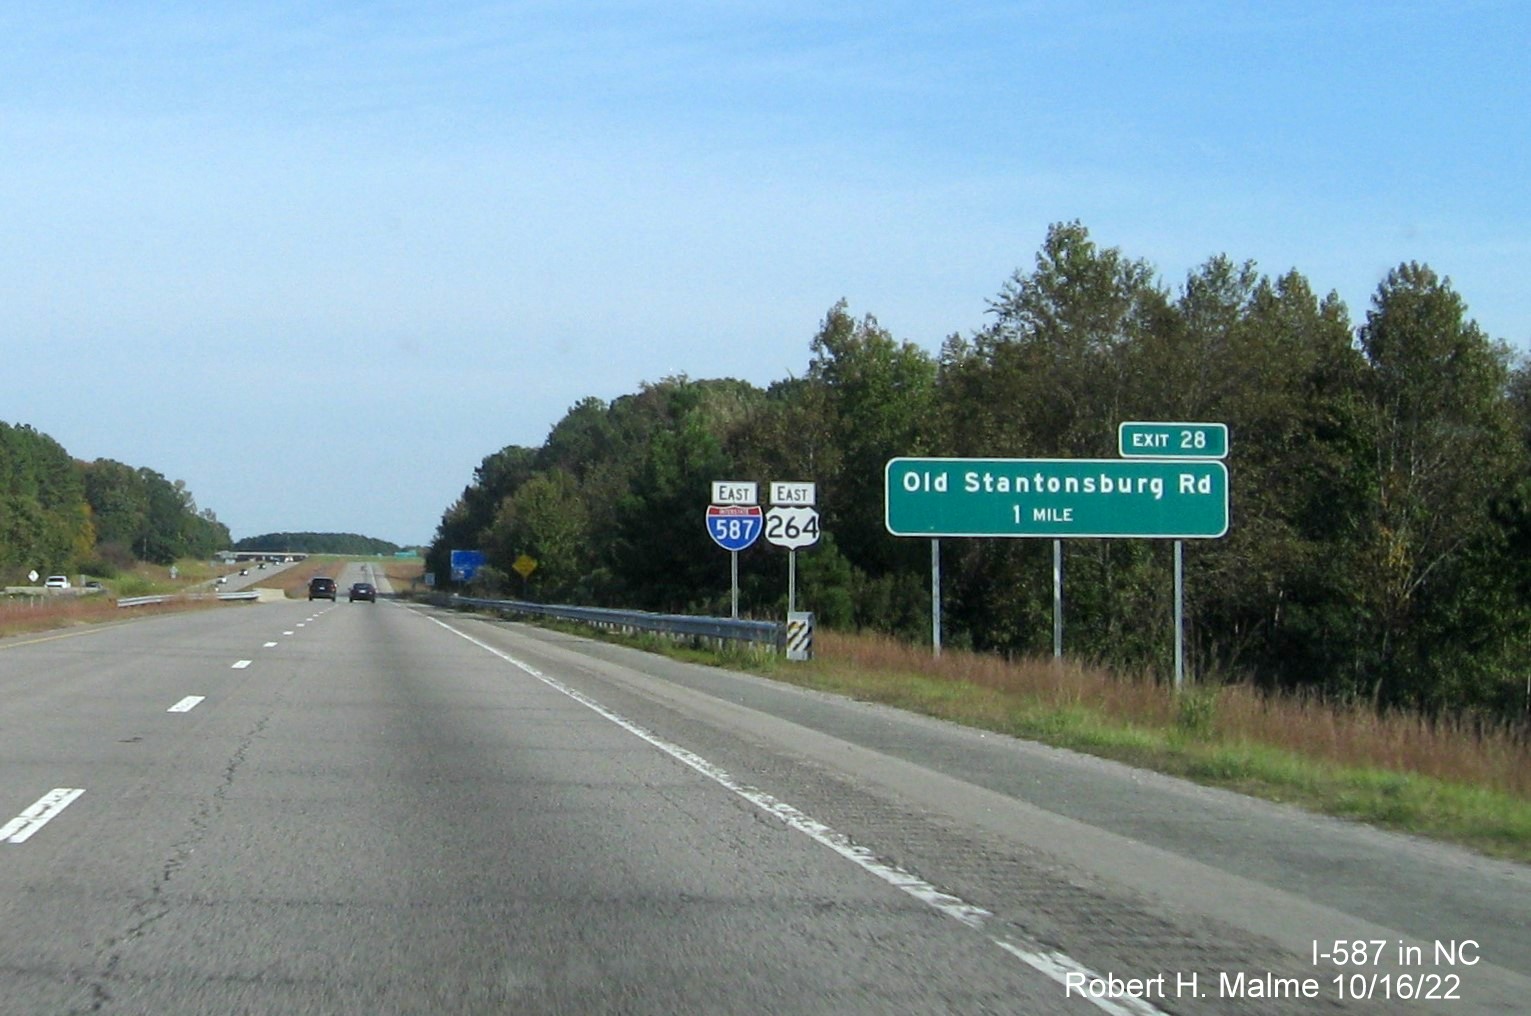 Image of 1 mile advance sign for Old Stantonsburg Road exit with new I-587 milepost exit number on I-587/US 264 East in Wilson, October 2022